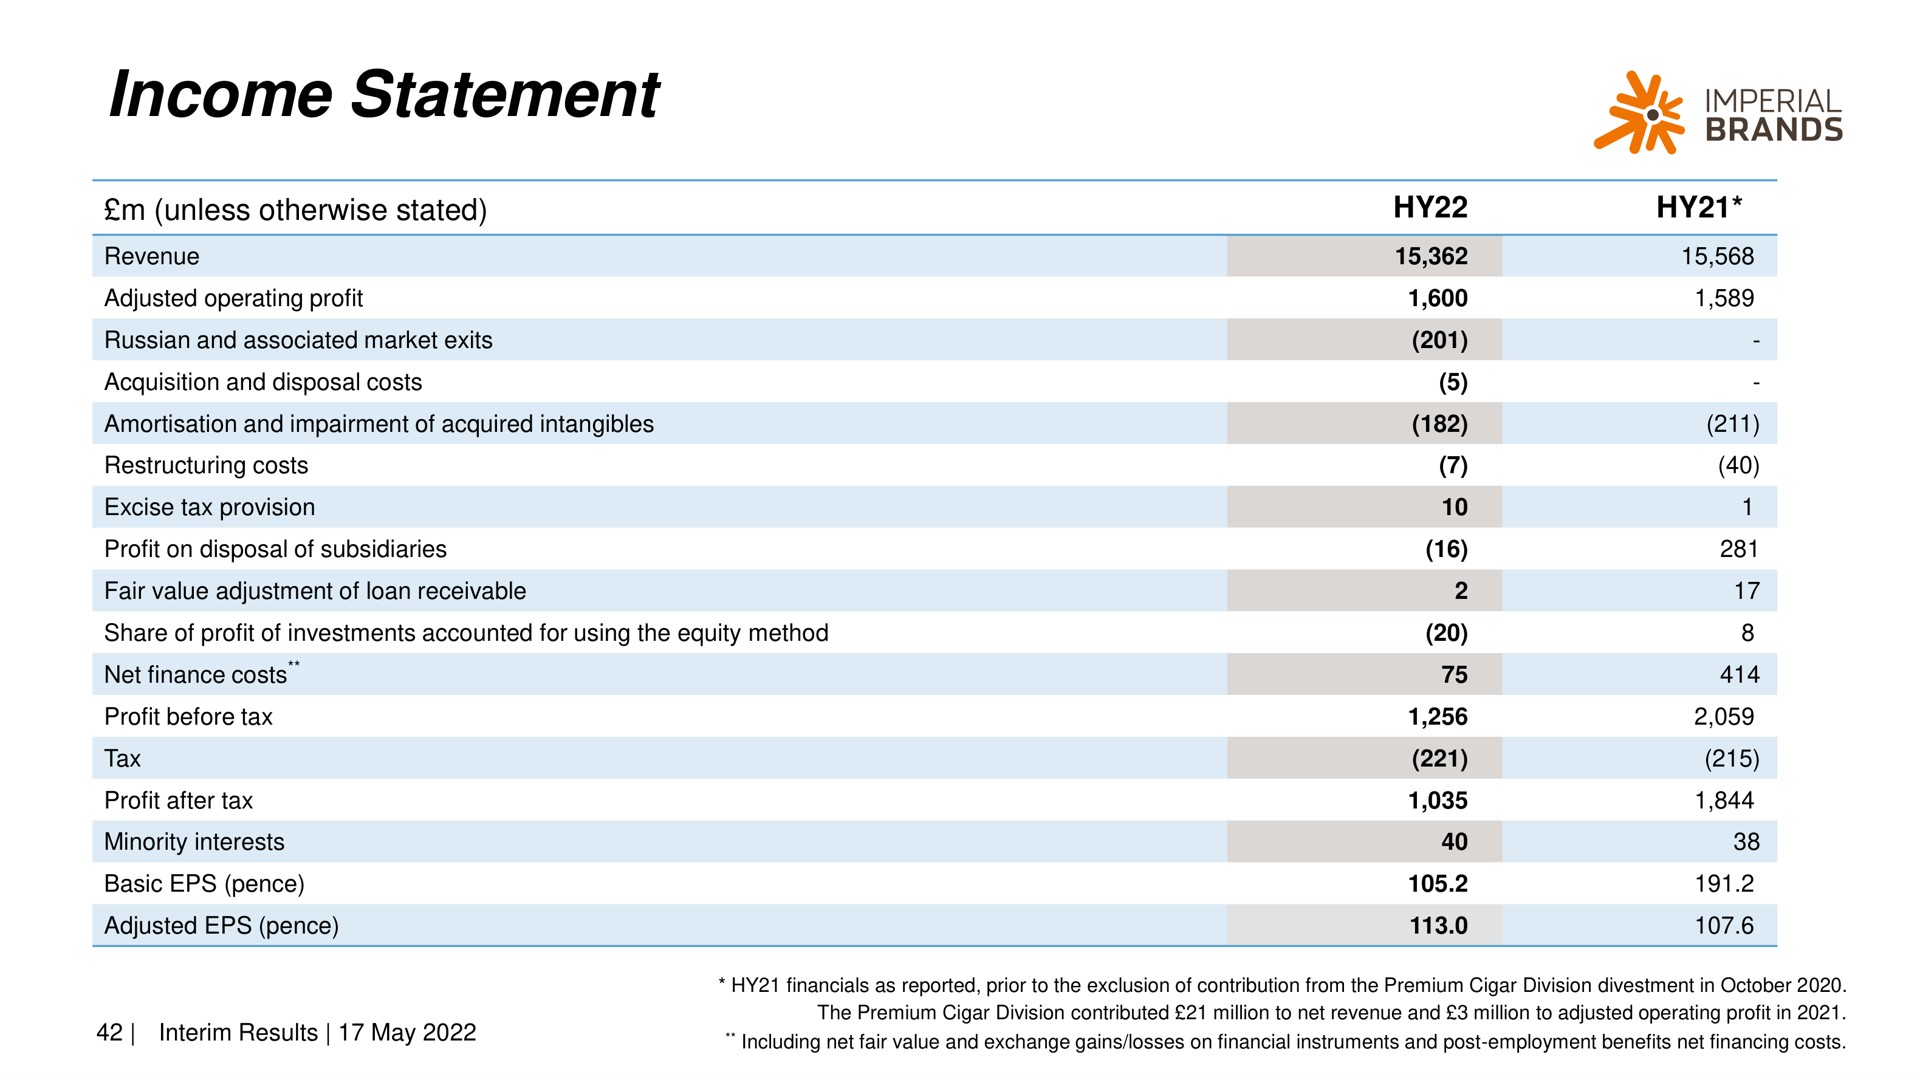 income statement | Imperial Brands